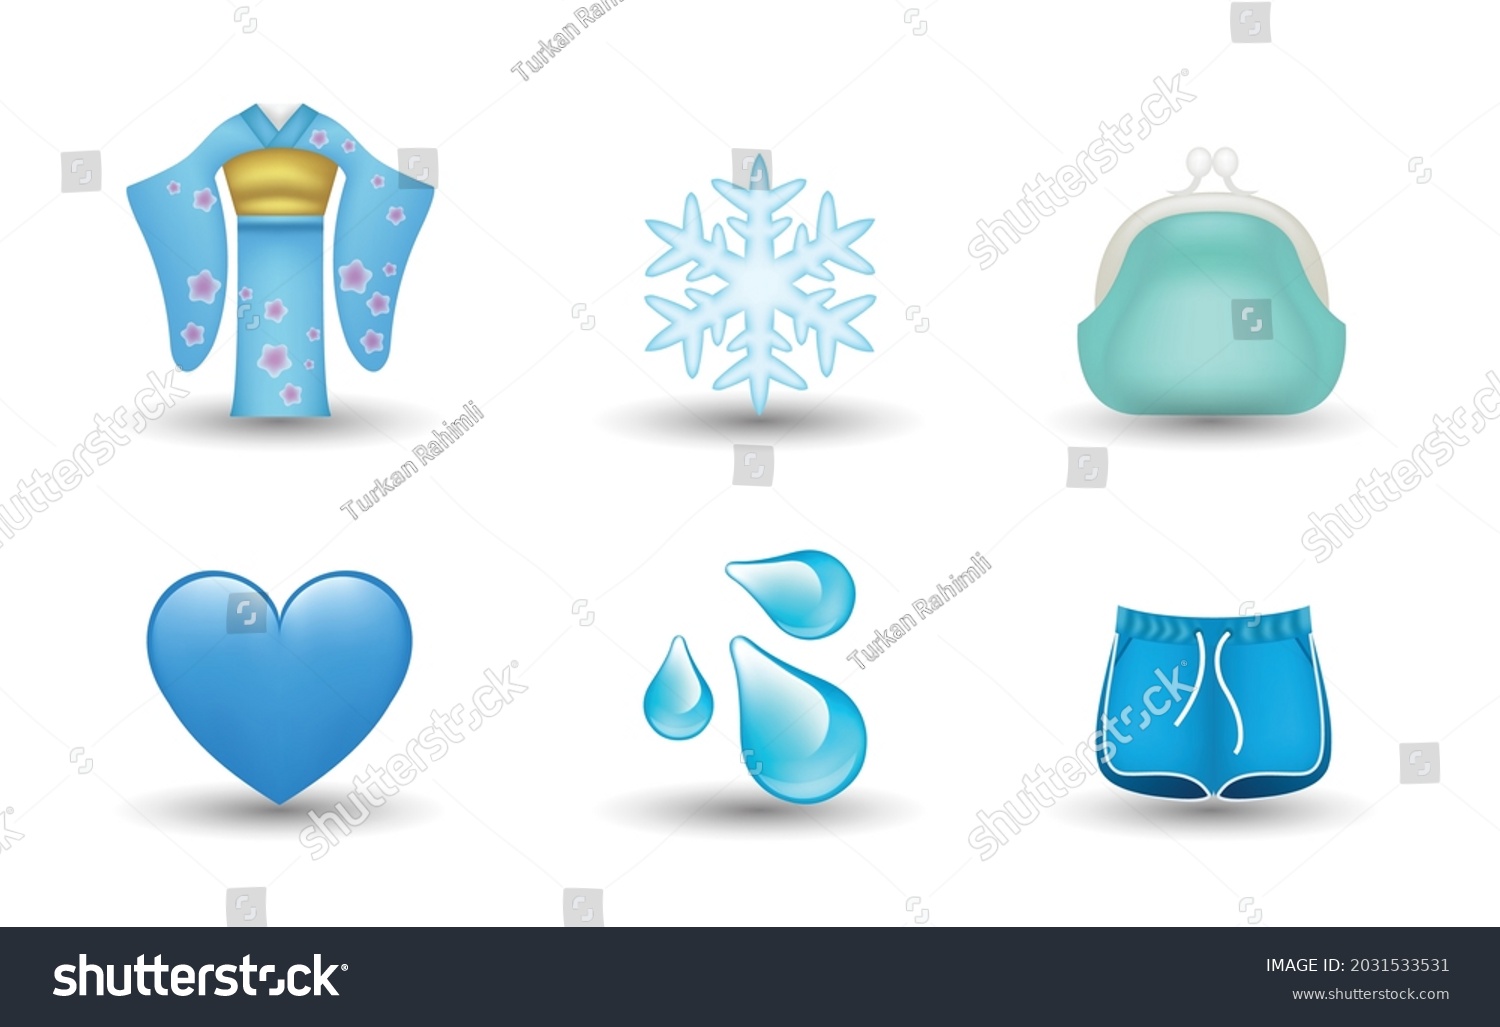 SVG of 6 Emoticon isolated on White Background. Isolated Vector Illustration. Dress, snowflake, purse, blue heart, water drop, shorts vector emoji Illustration. Set of 3d objects Illustration in blue color. svg